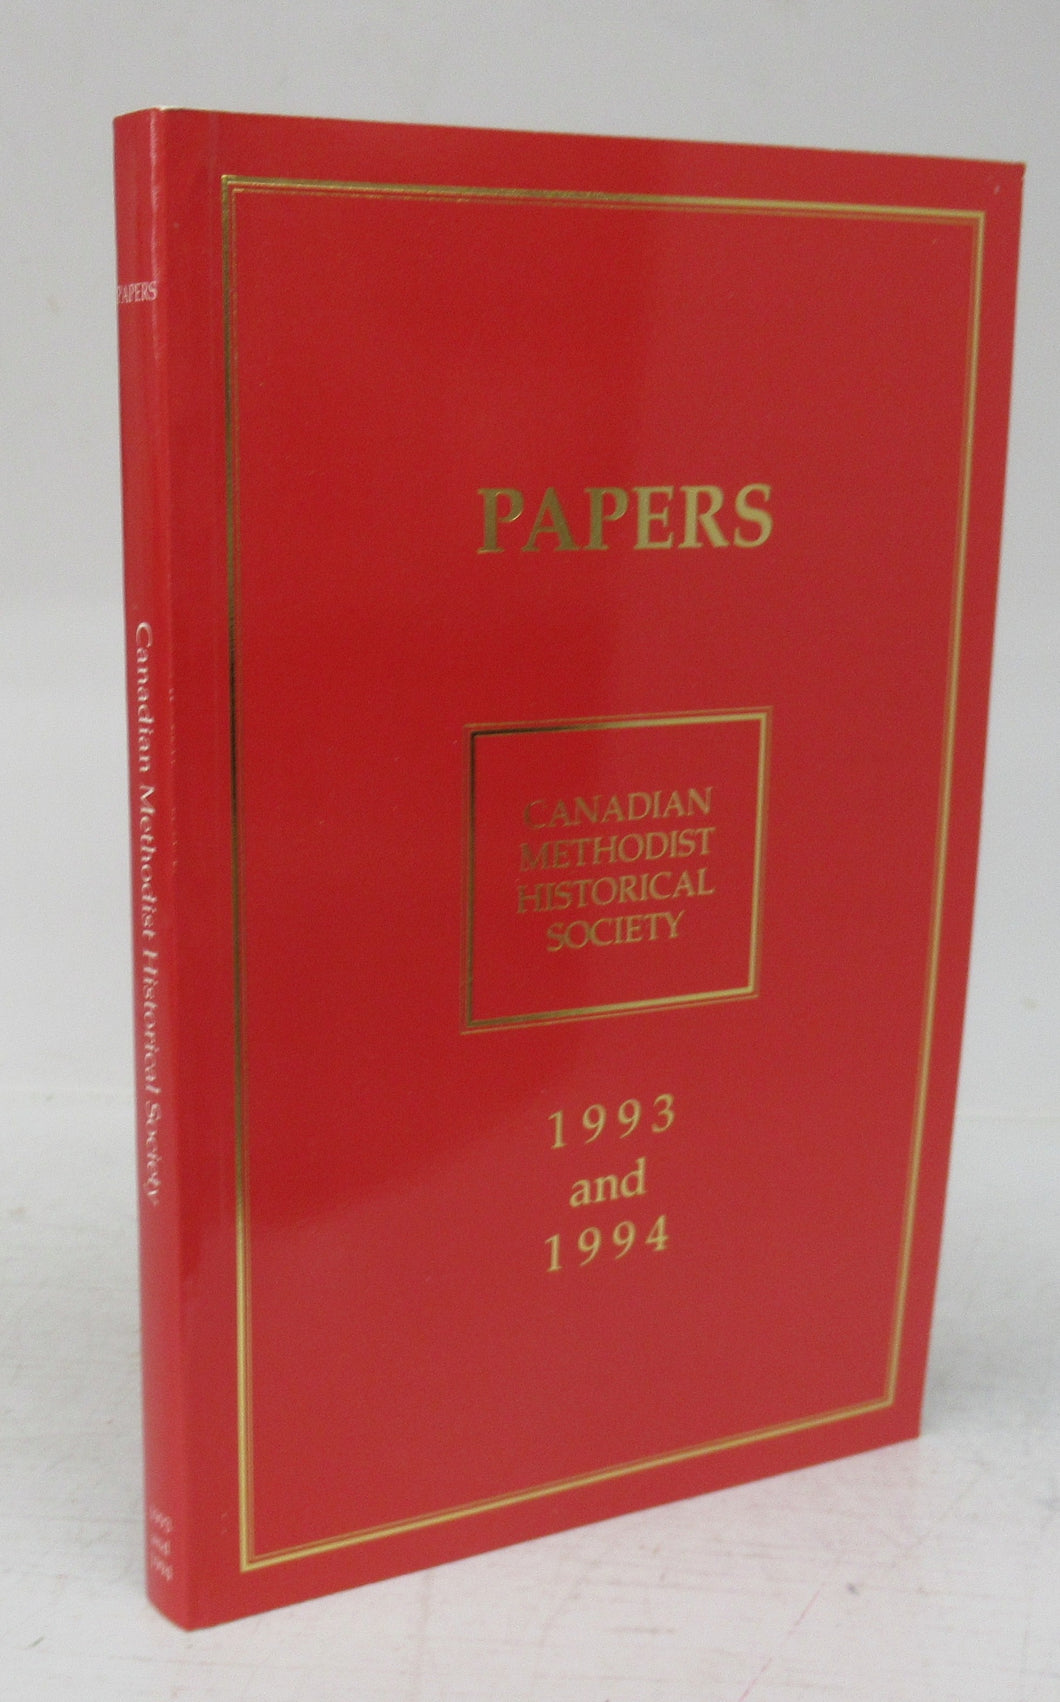 Canadian Methodist Historical Society Papers Volume 10